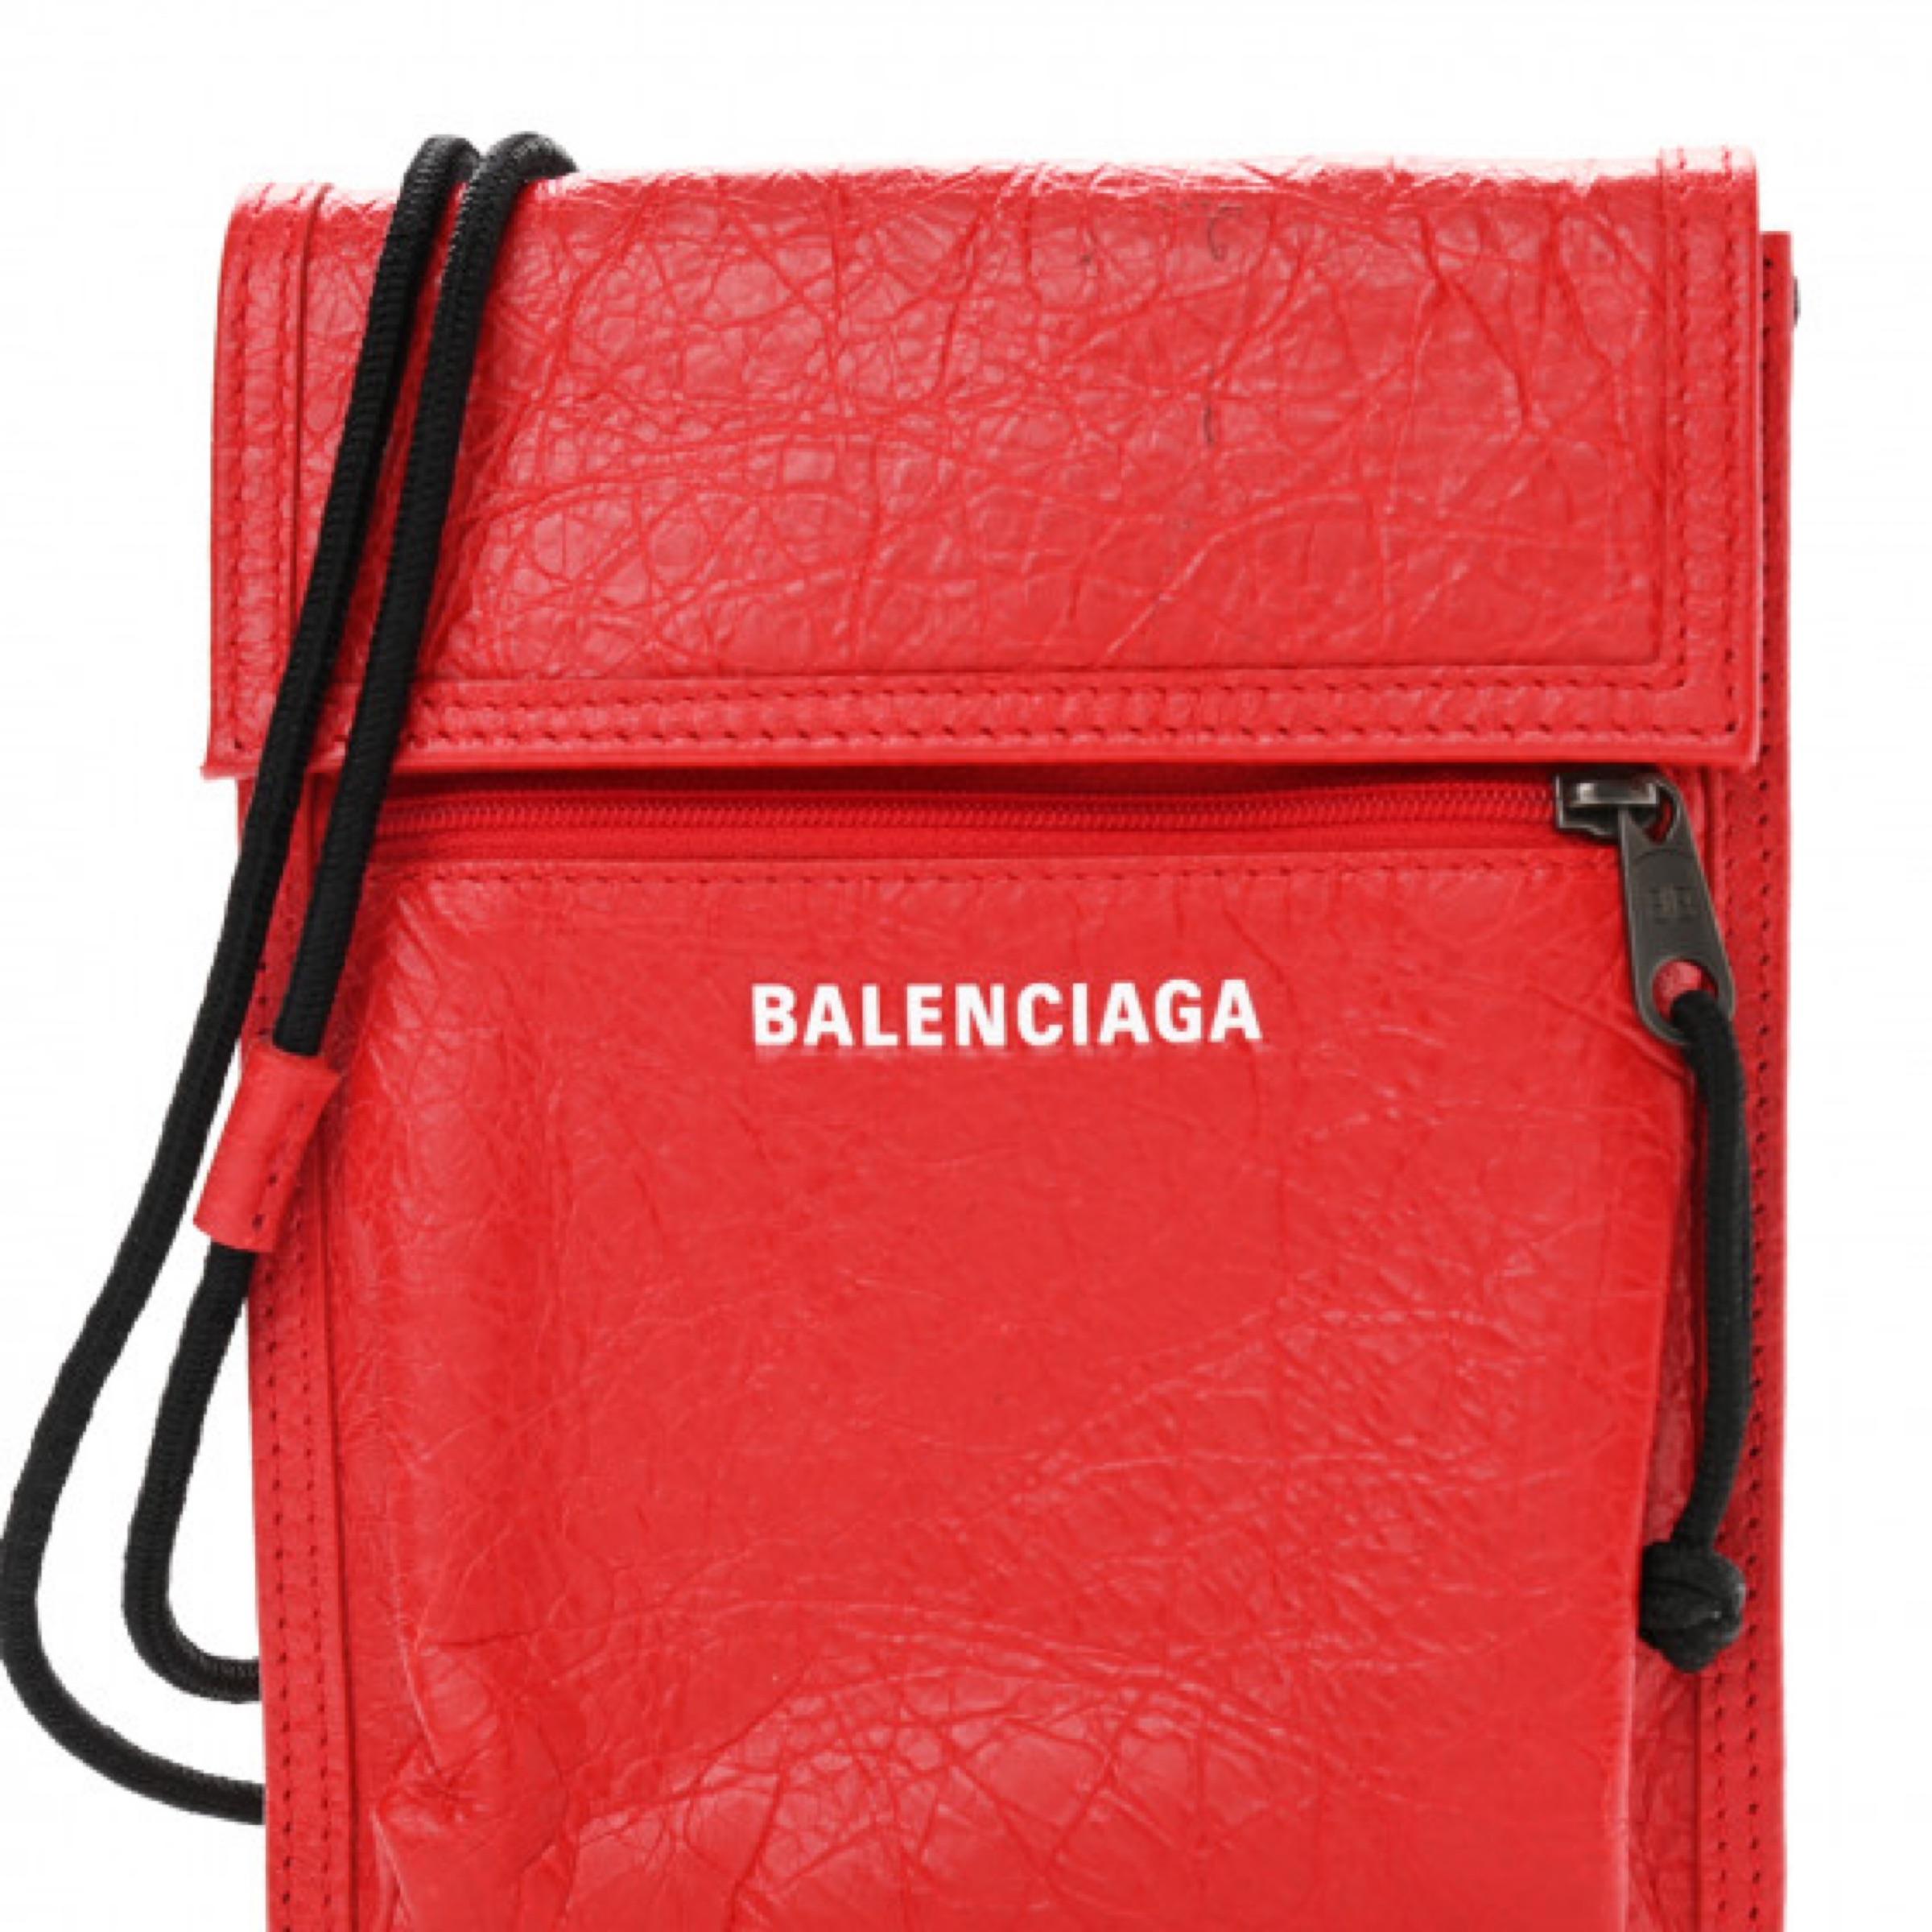 NEW Balenciaga Red Explorer Cracked Leather Pouch Crossbody Bag For Sale 5